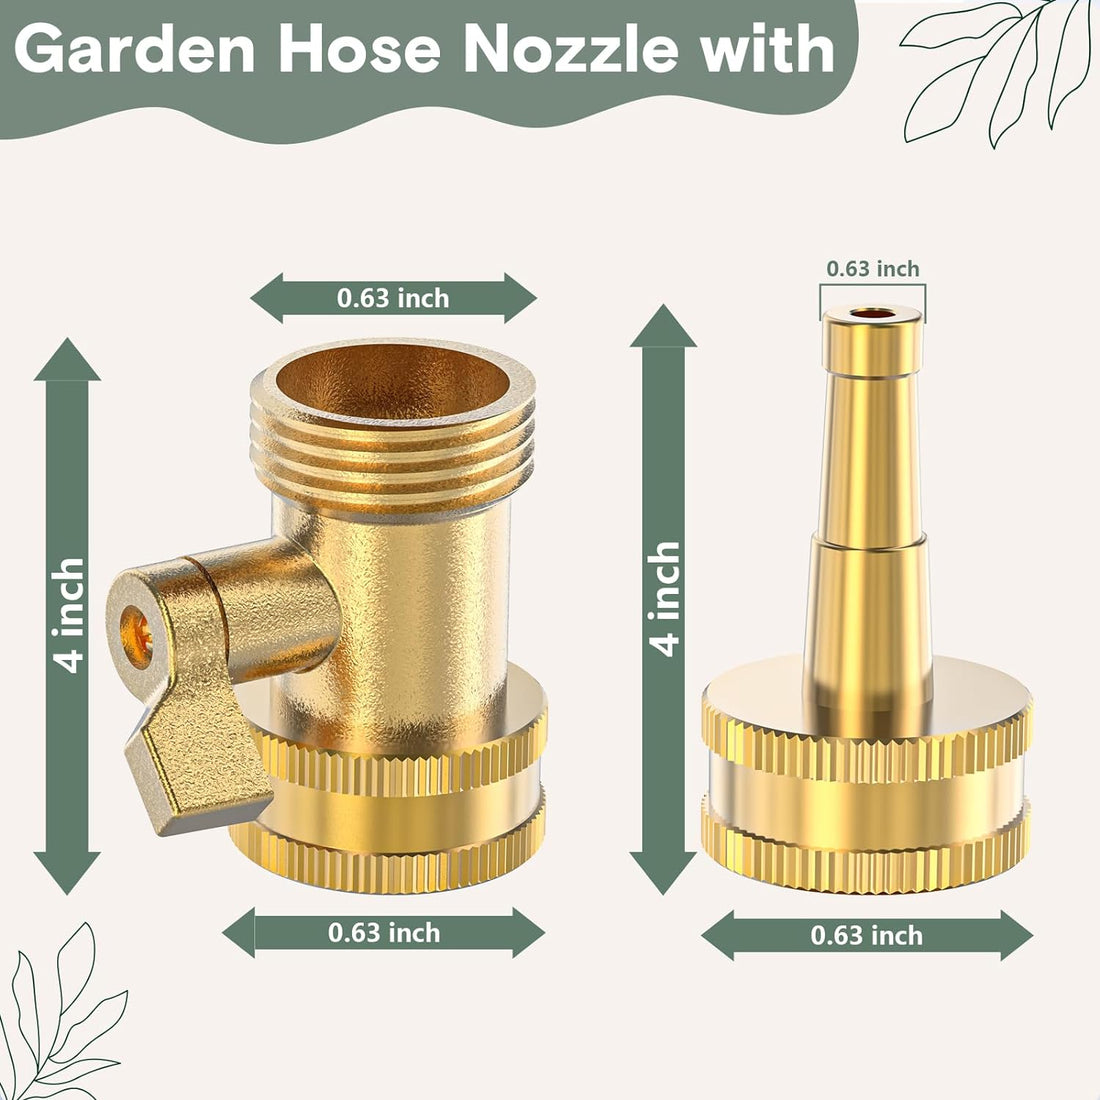 Twinkle Star Jet Nozzle Power Washer for Garden Hose High Pressure Adjustable Twist Hose Nozzle with On/Off Valve, Heavy Duty Solid Brass Construction, Leak-Free Operation 3/4" GHT Connector 4 Pack